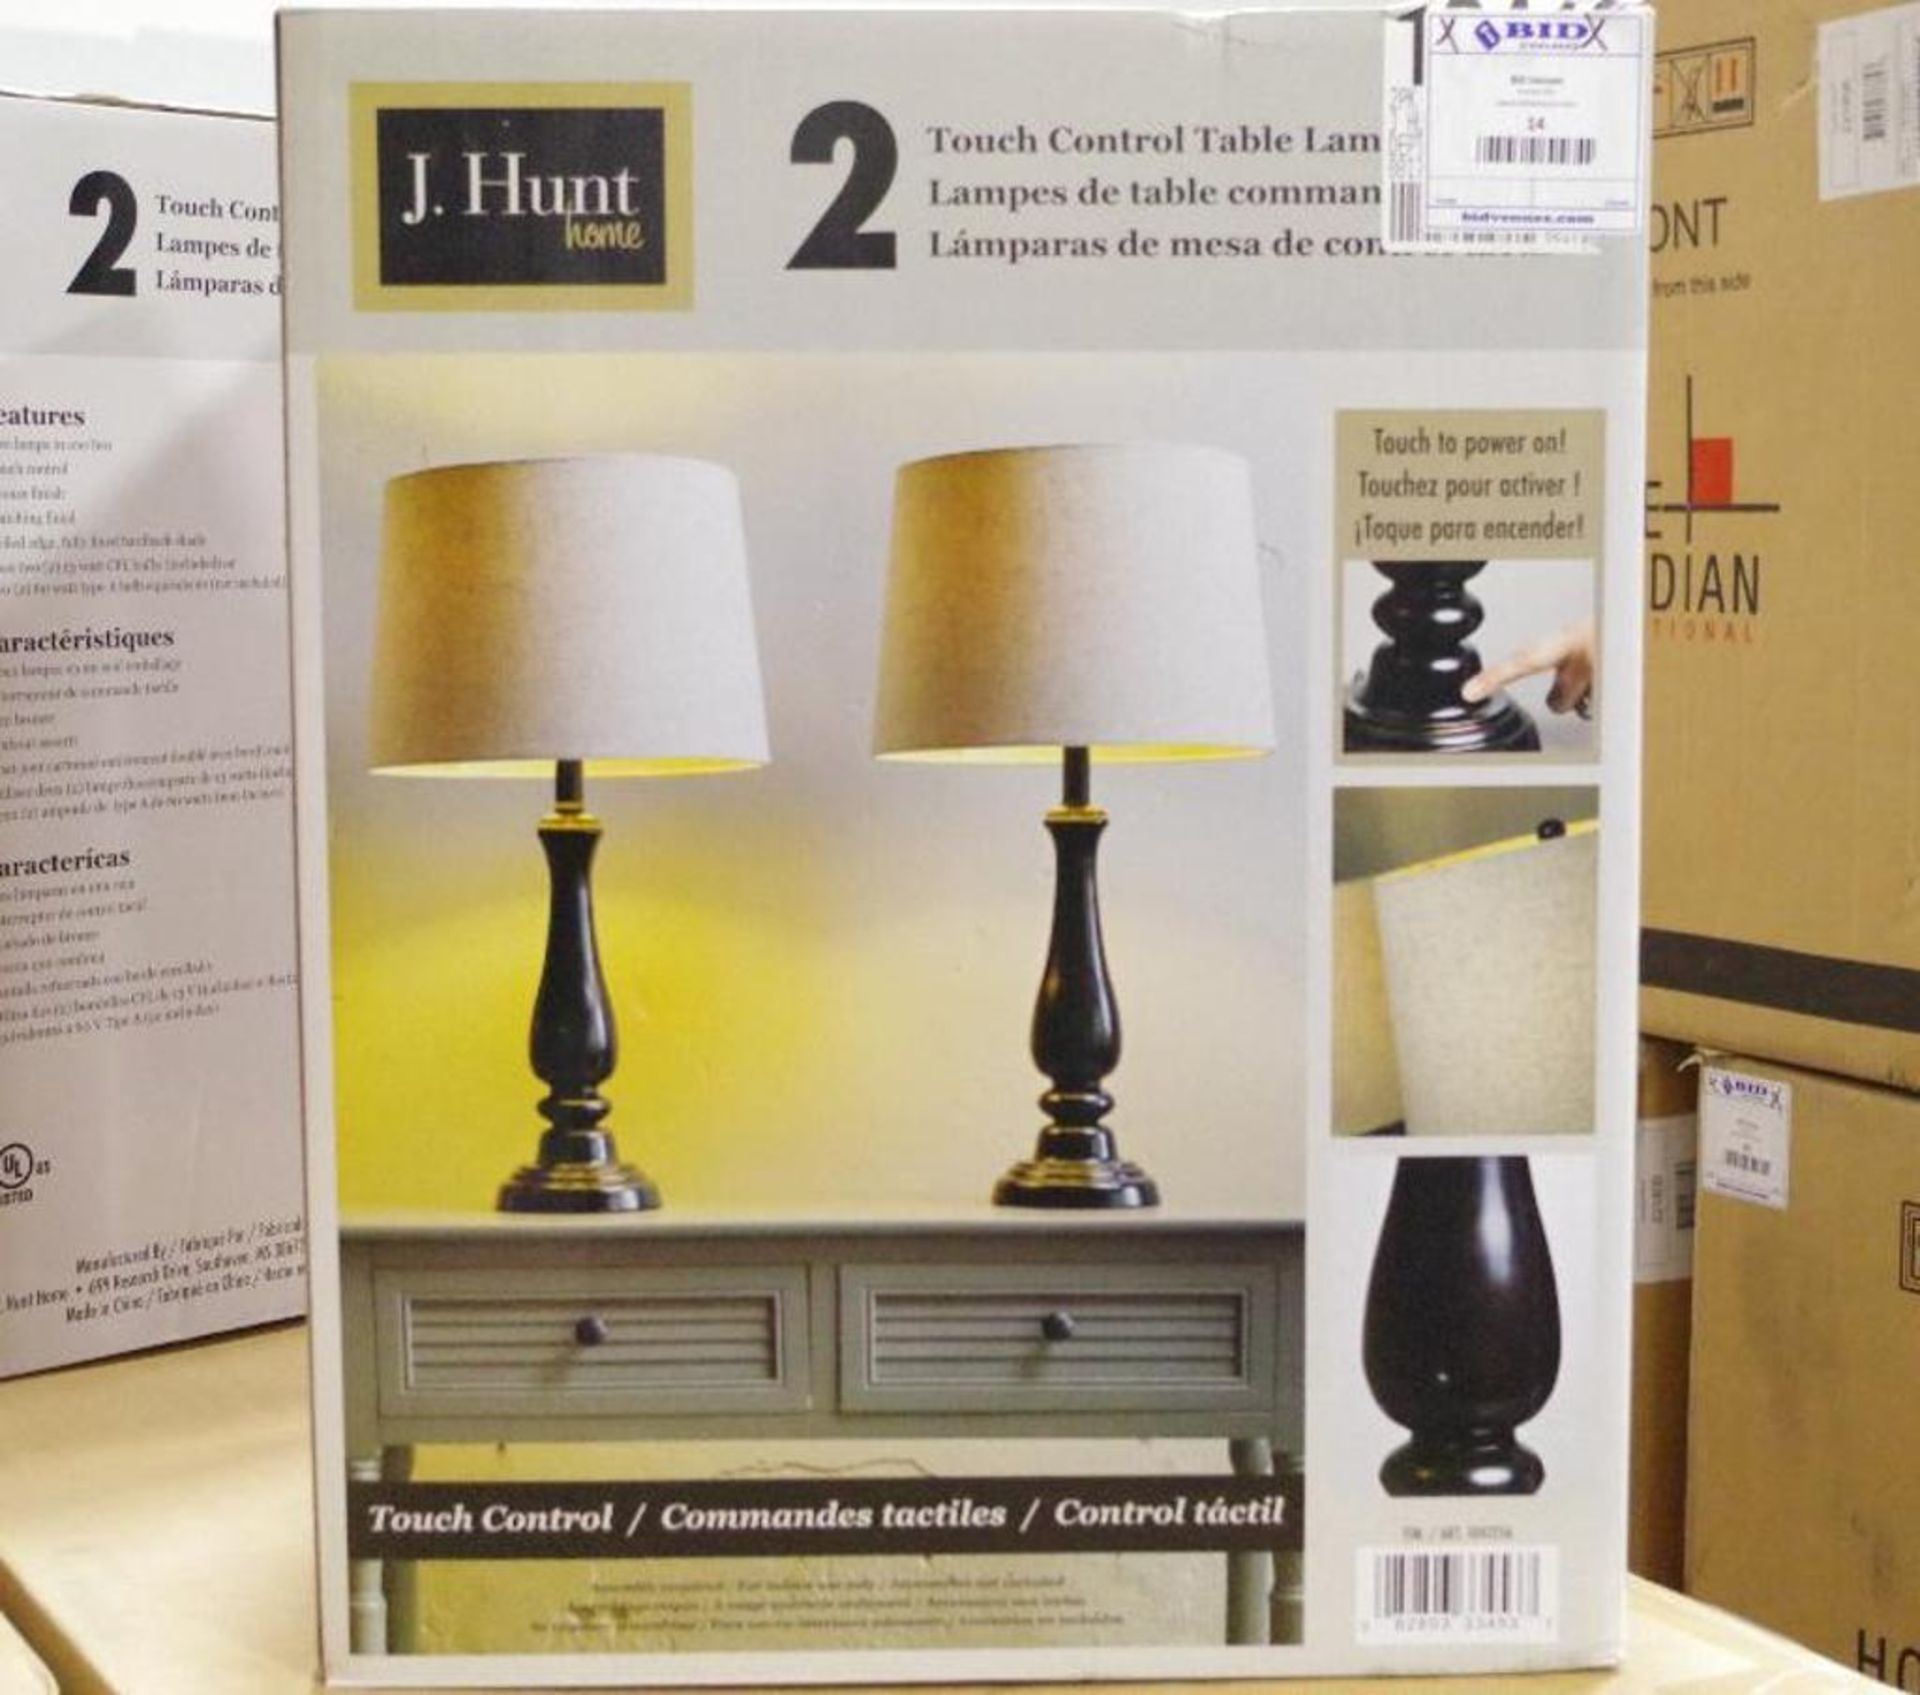 NEW J. HUNT Touch Control Table Lamps (Box Contains 2 Lamps) - Image 2 of 2